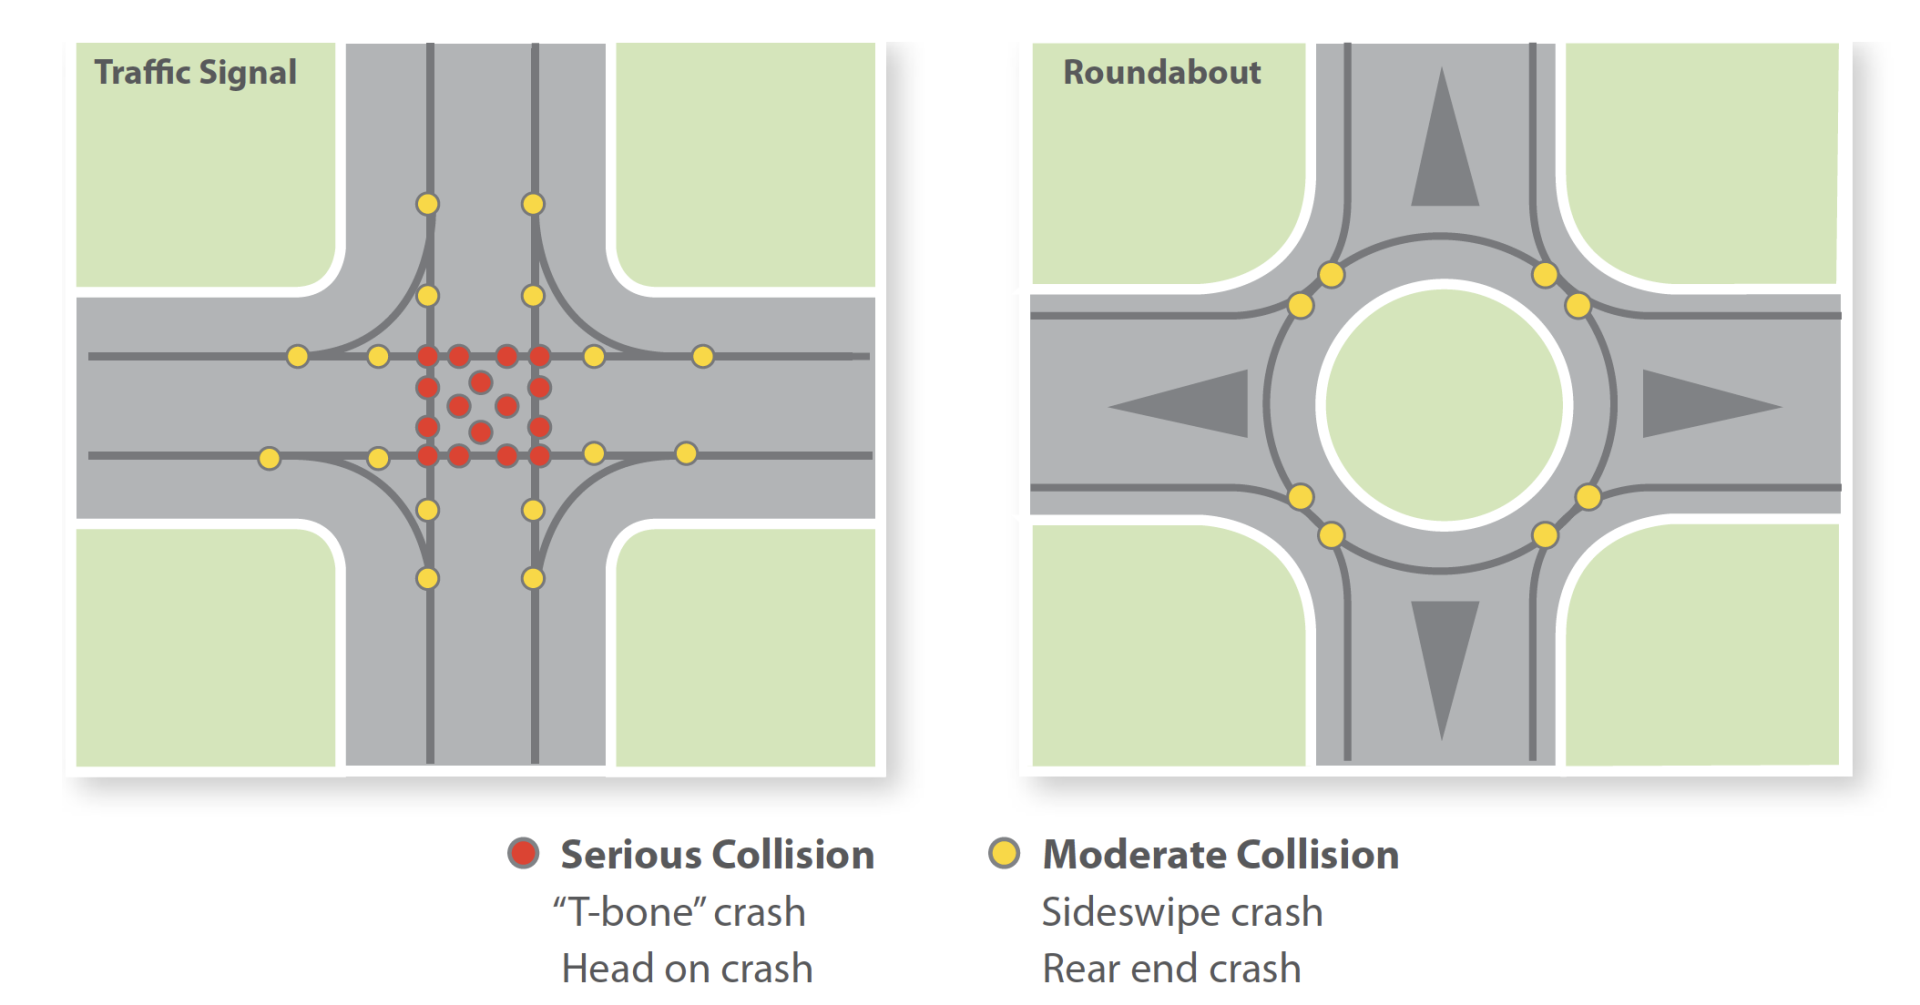 Roundabout collisions